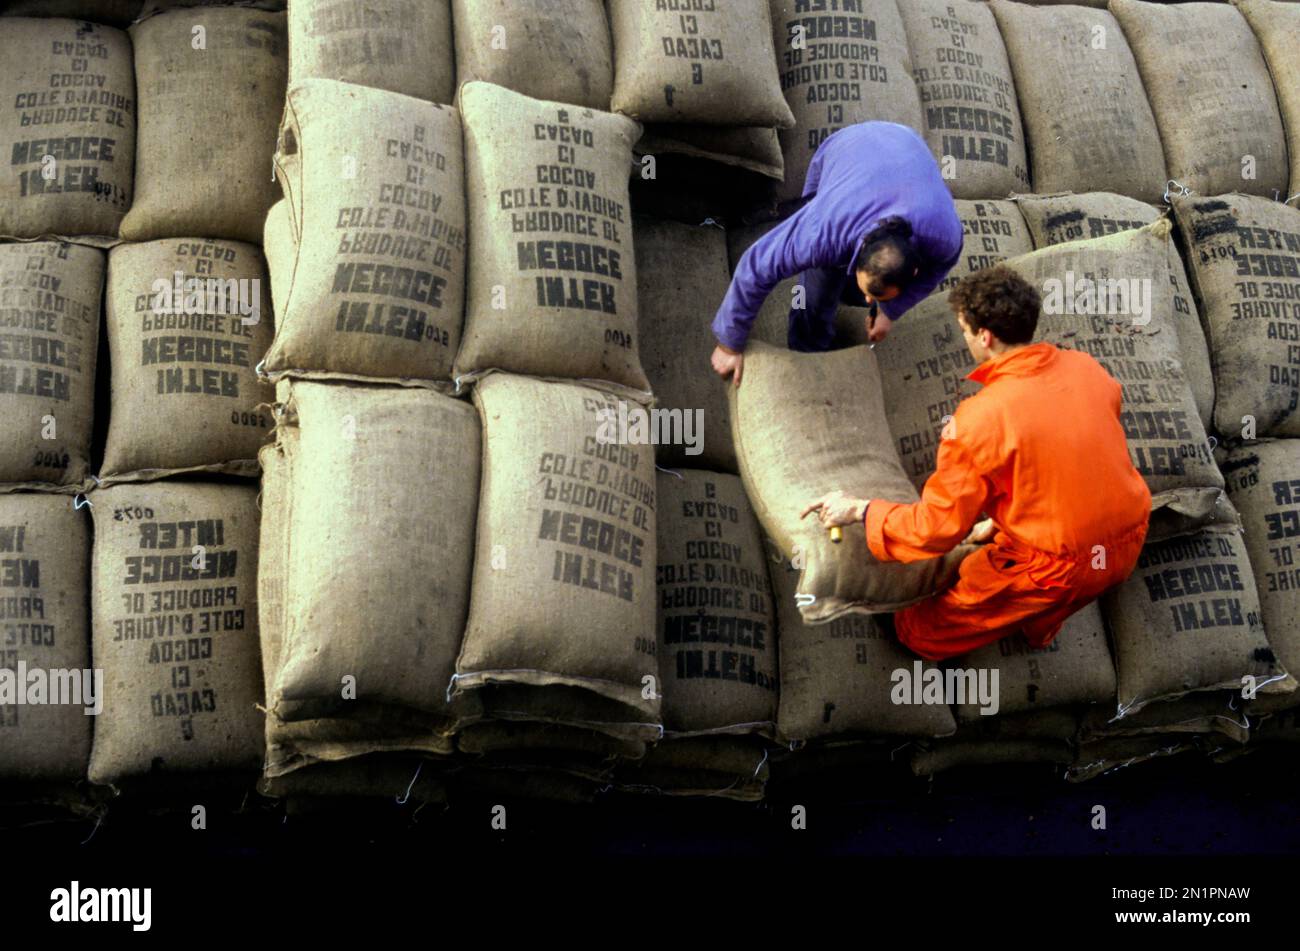 The Netherlands, Amsterdam. Loading cocoa into a ship. Stock Photo